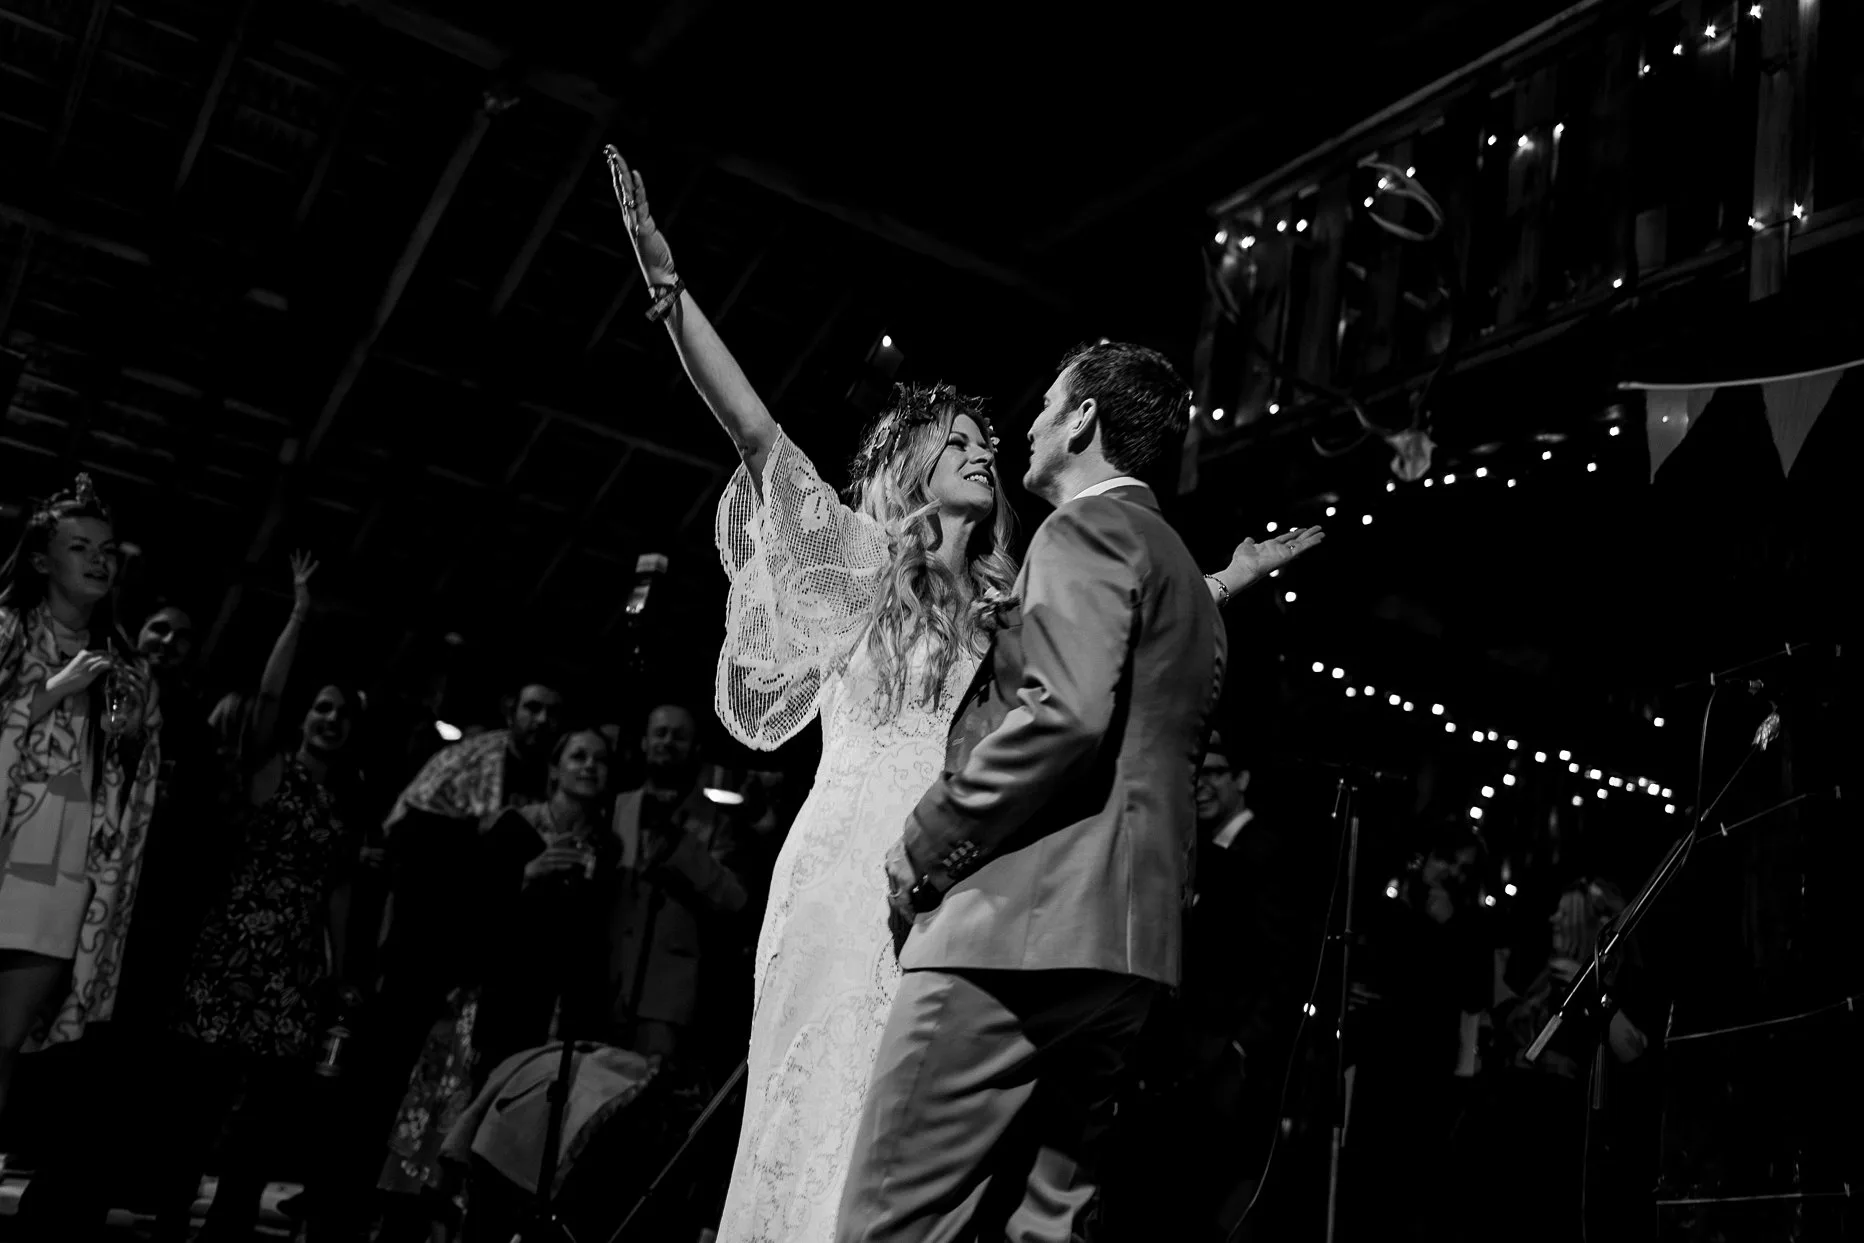 Bride and groom enjoying their first dance together to a heavy metal song. Bride has her arms in the air and is facing her husband smiling.